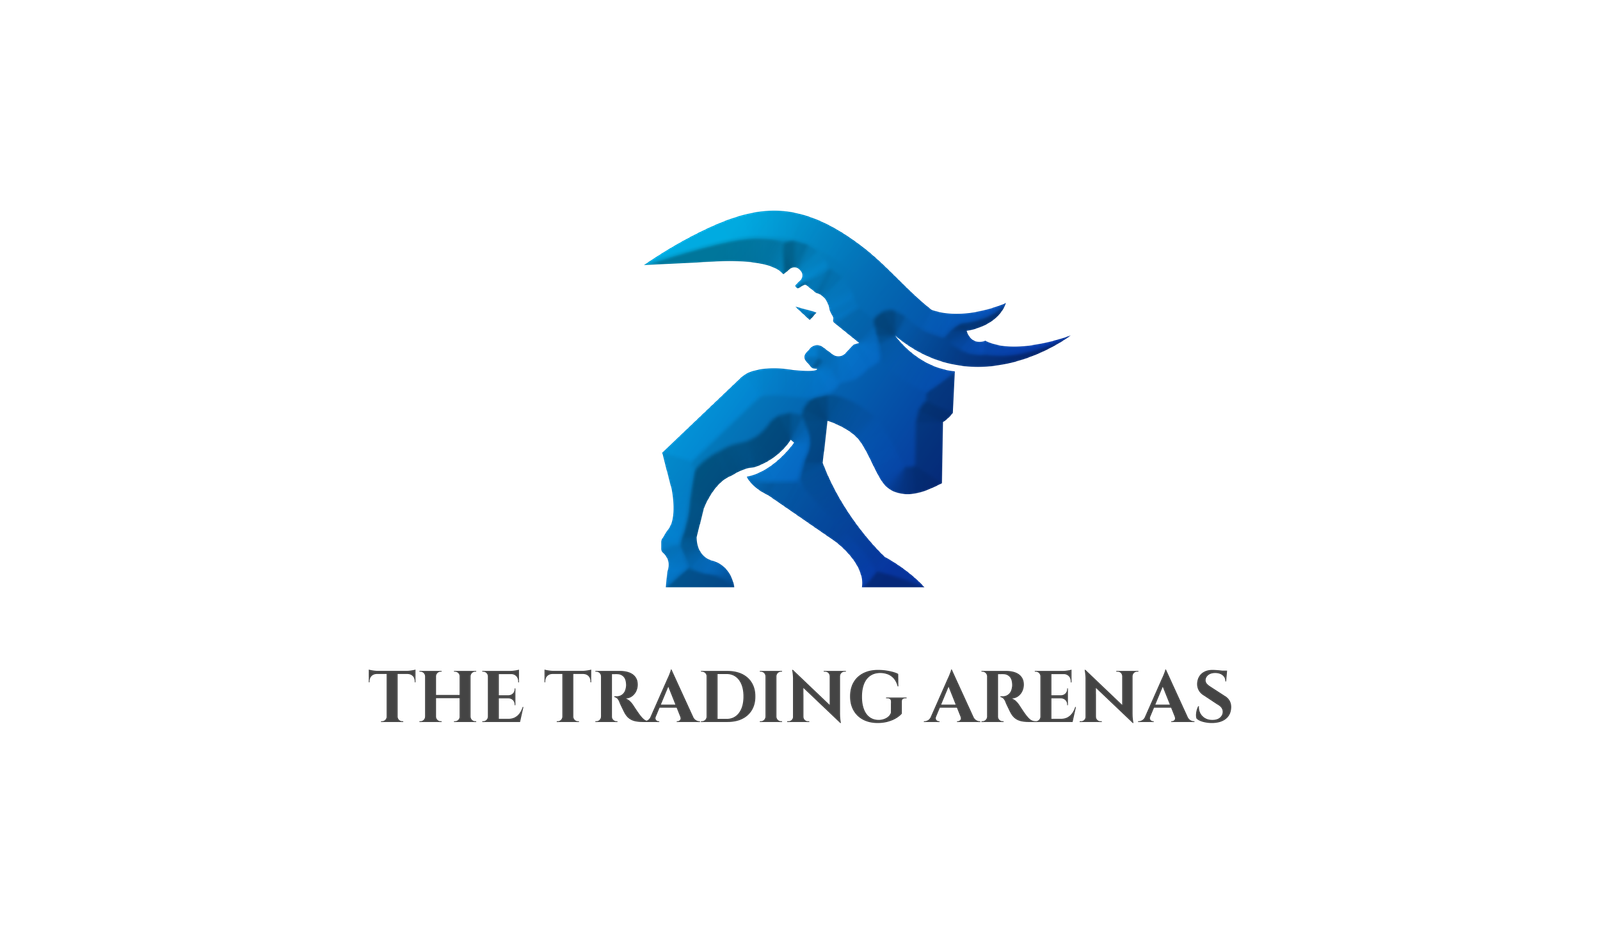 The Trading Arenas